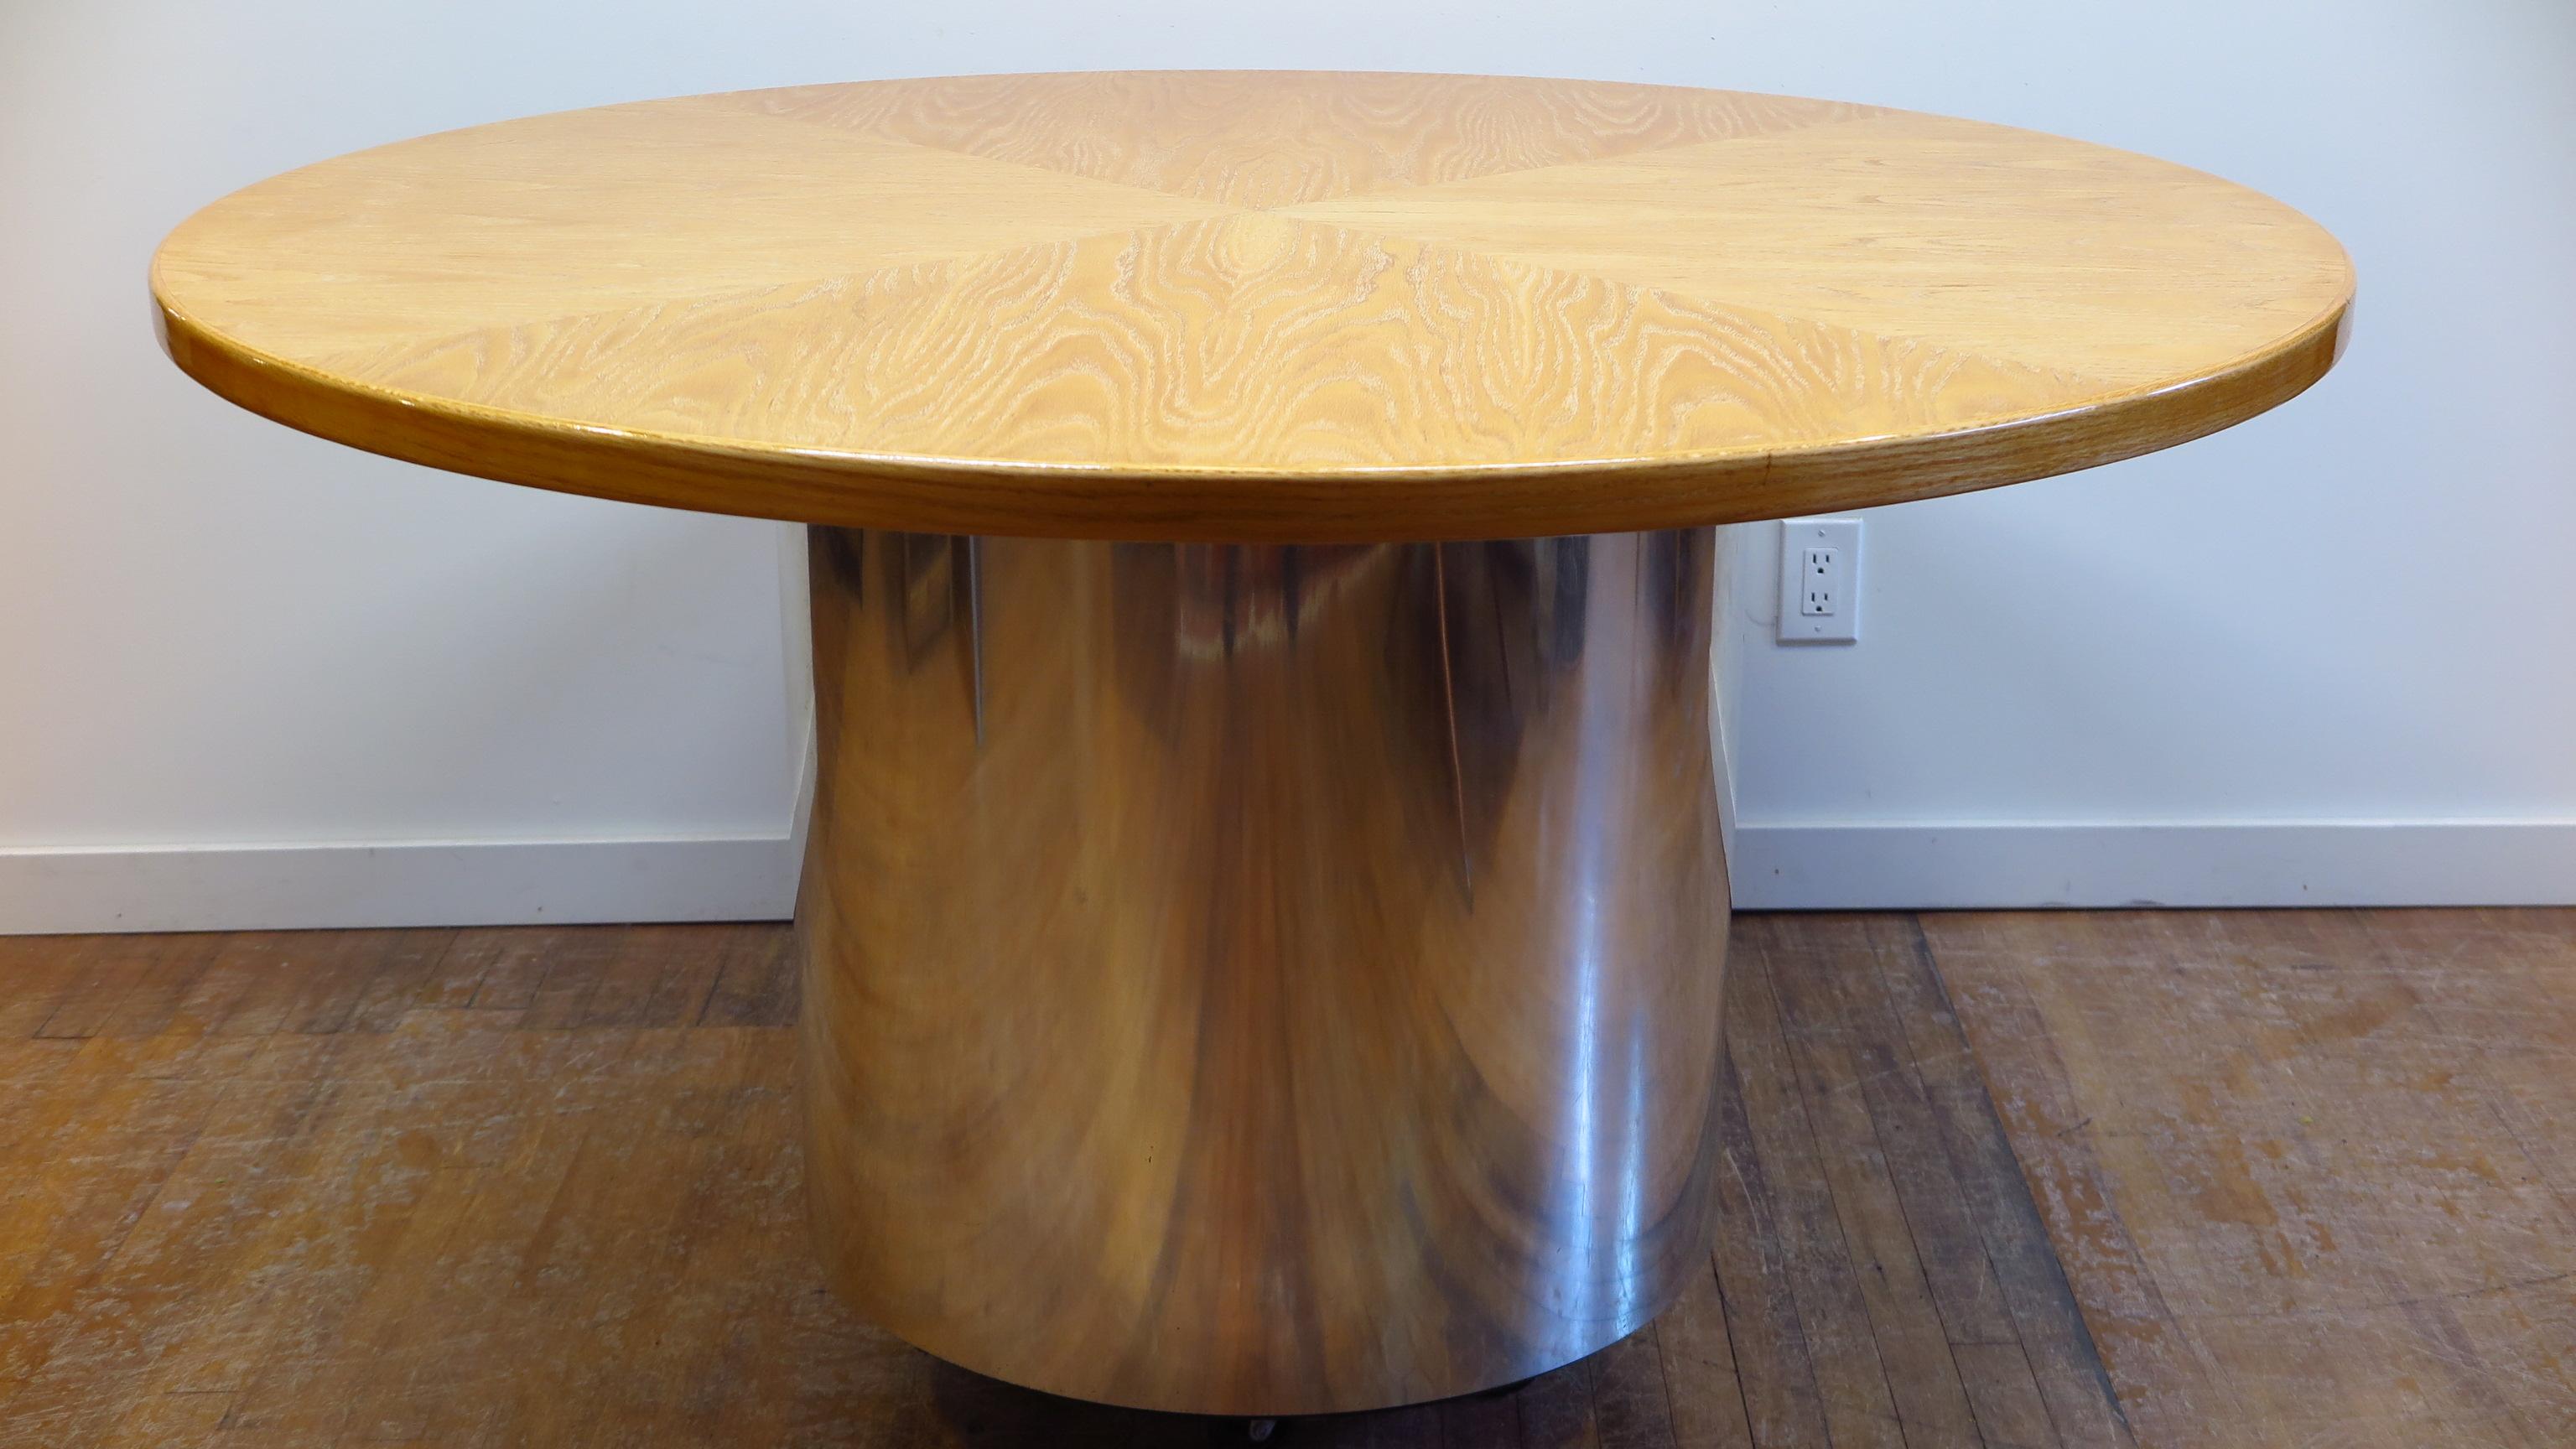 Custom built Gunderson round dining table cerused oak on chromed panel cylinder base, circa 1975 this item was a custom made one of a kind.   Light natural color top with a contrasting material base adds a very warm touch to a modern environment. 